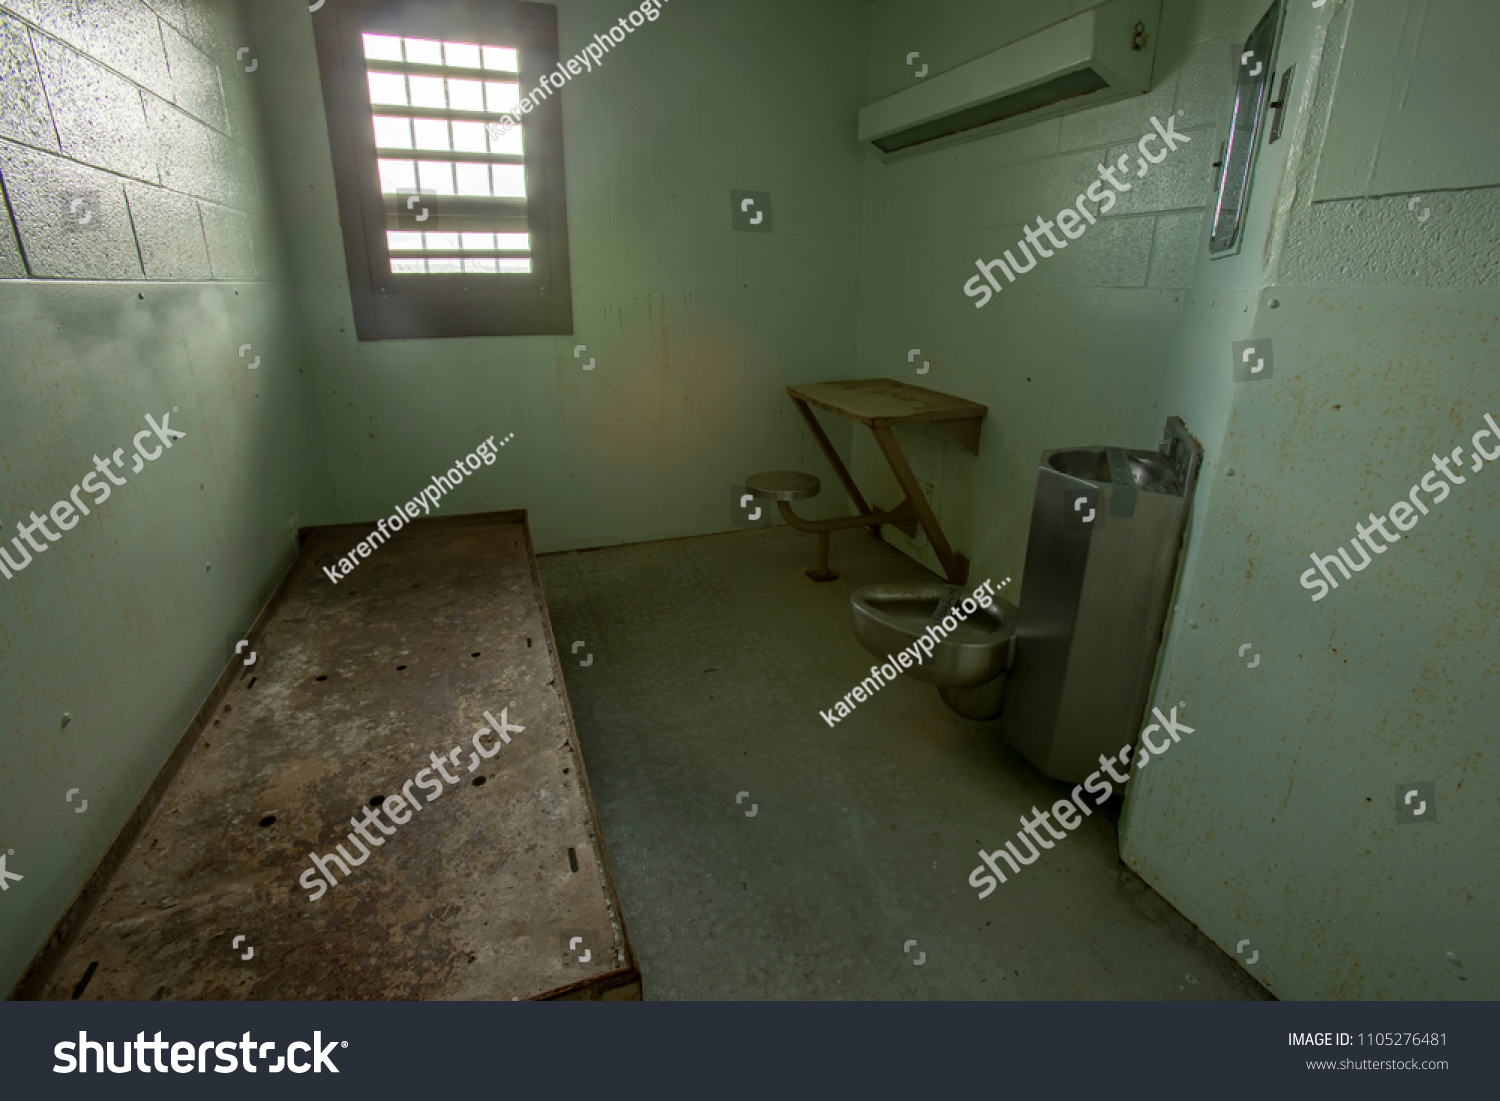 Interior of solitary confinement cell with metal bed, desk and toilet in old prison. #1105276481